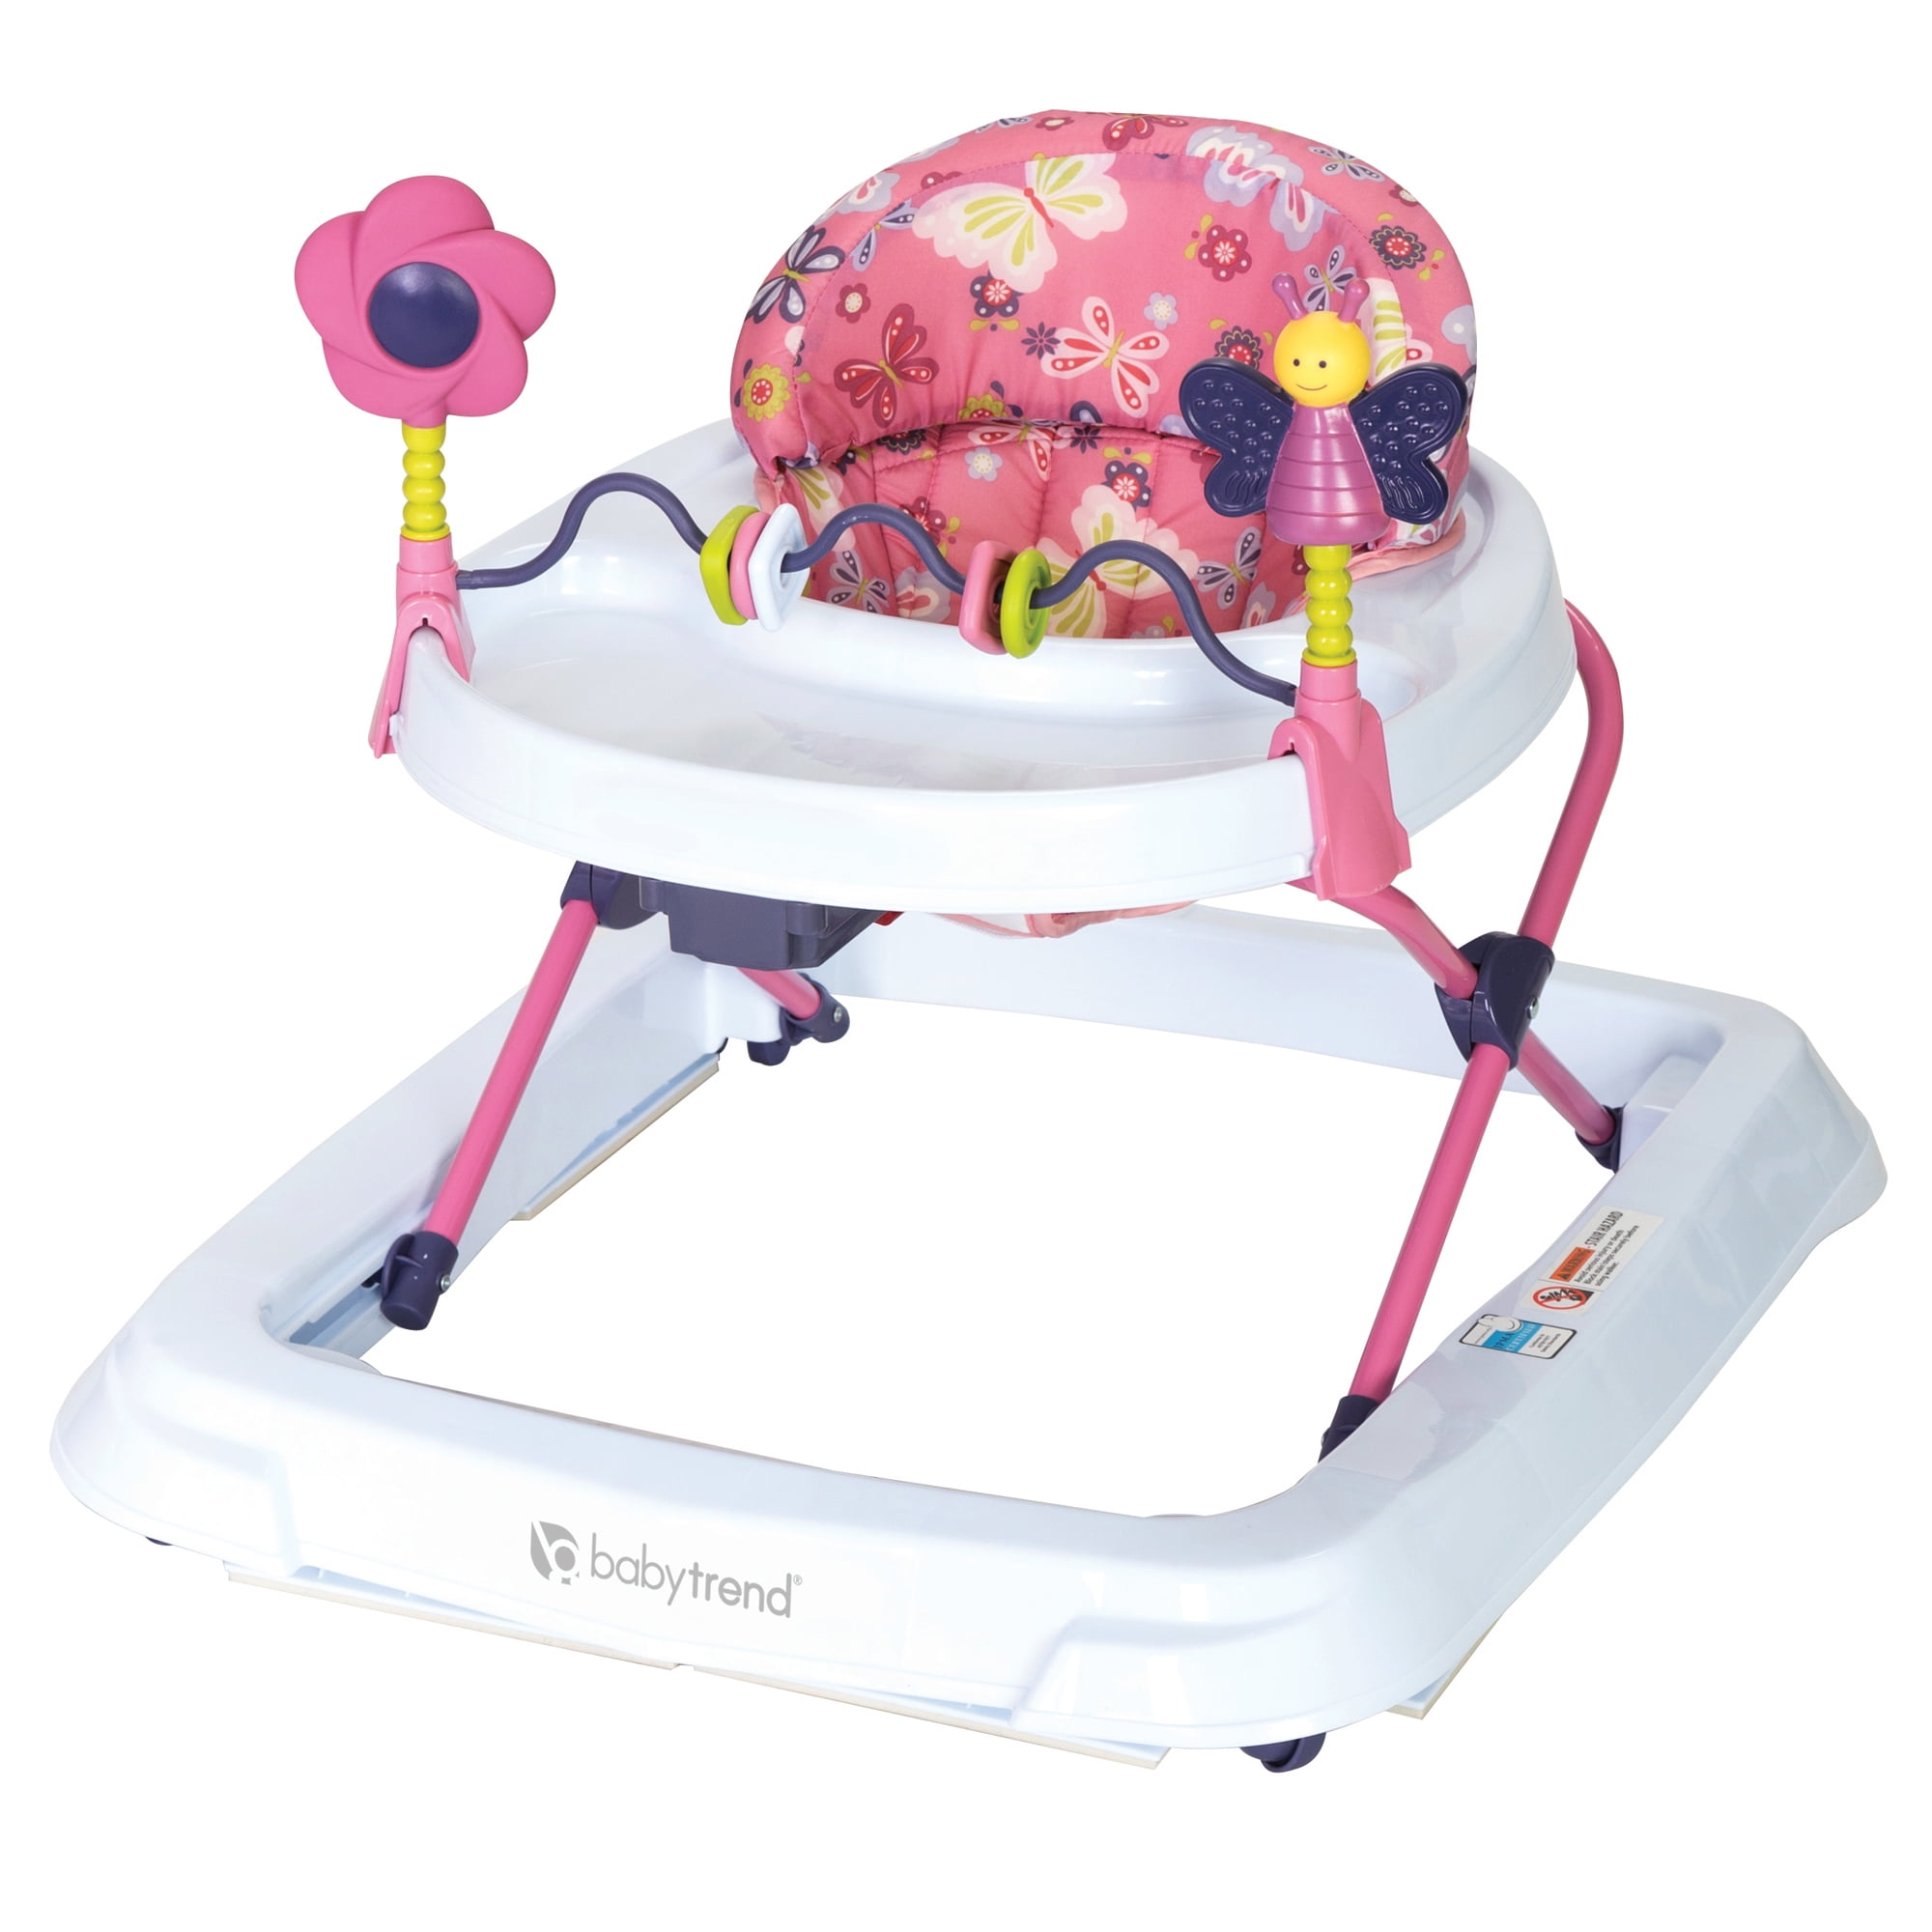 Baby Trend Walker Emily 1-24 months Adjustable Height With Tray BRAND NEW 